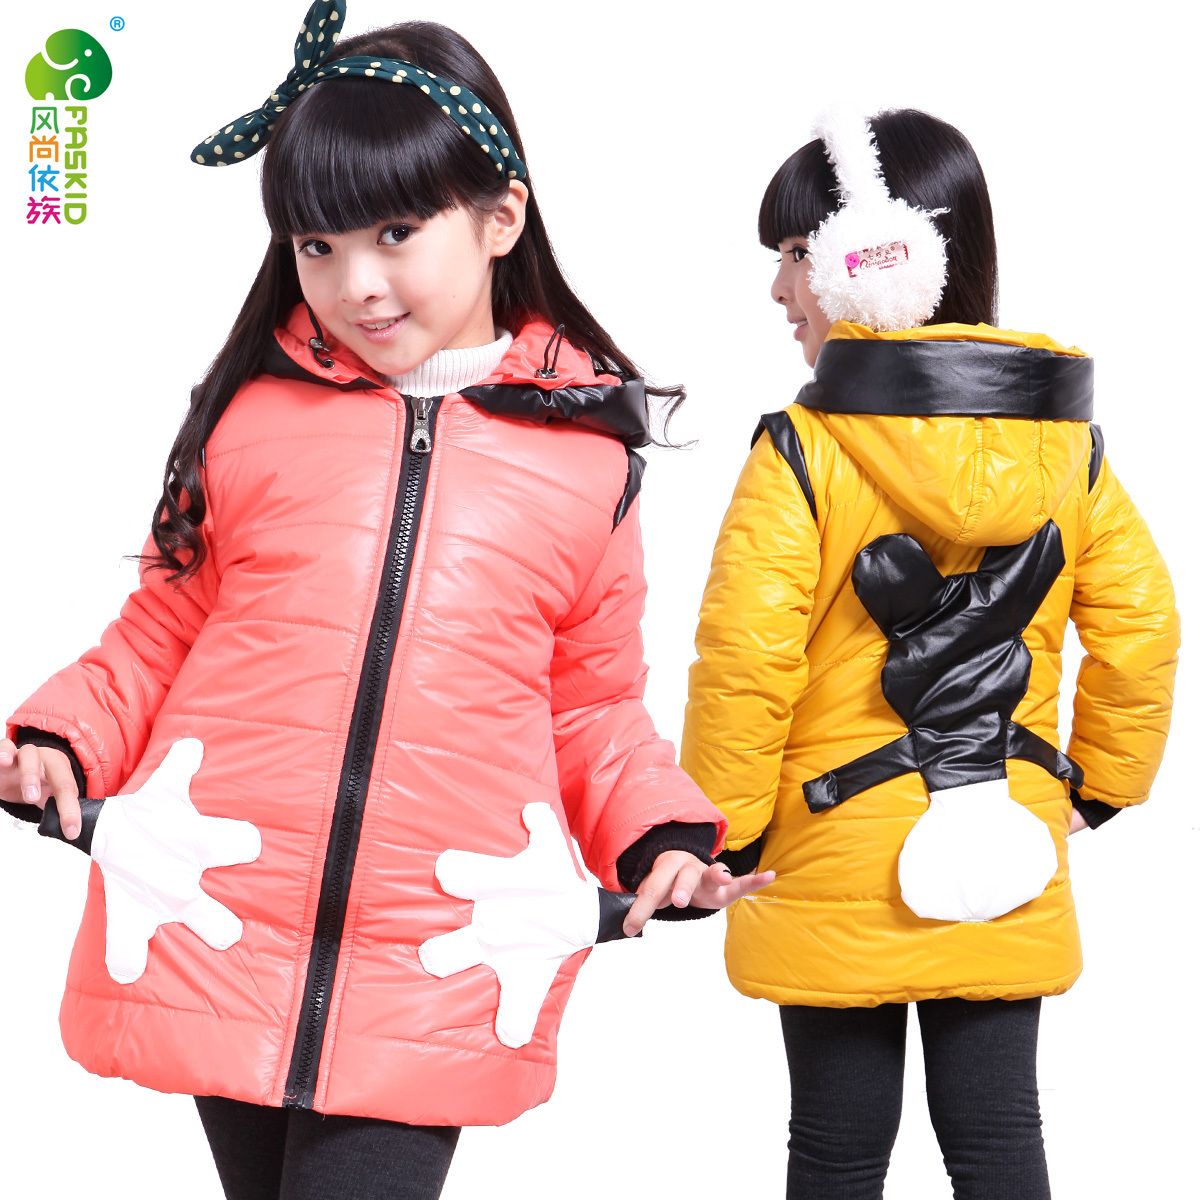 Winter winter female child boys clothing oblique zipper thickening child outerwear wadded jacket cotton-padded jacket